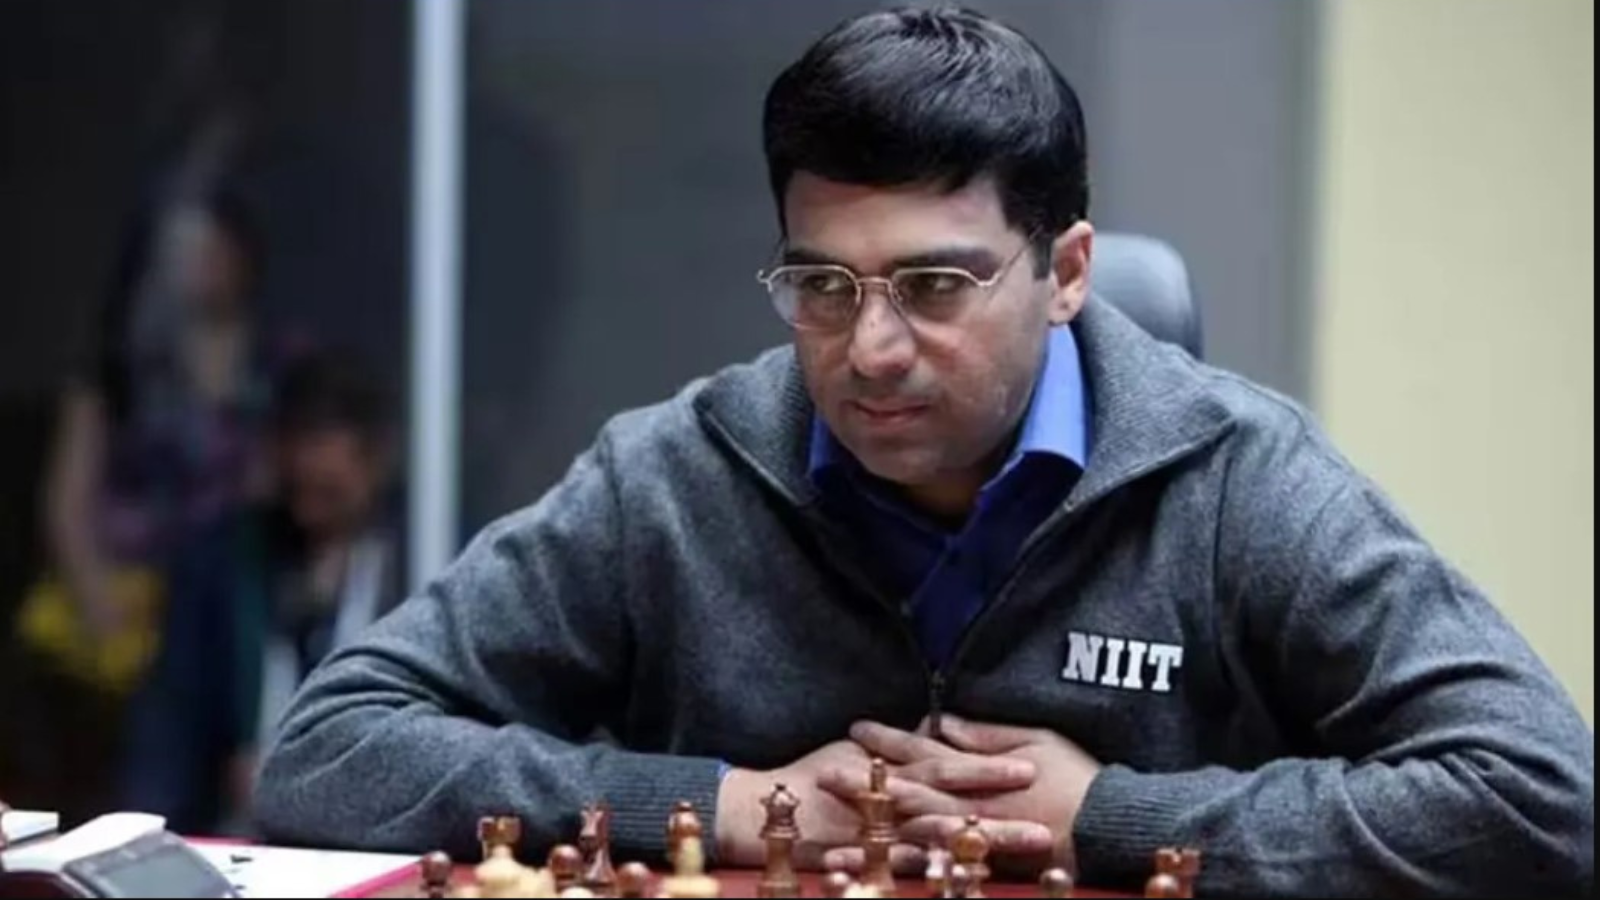 Chess has adapted well to Covid-19 shutdowns with online events: Viswanathan  Anand